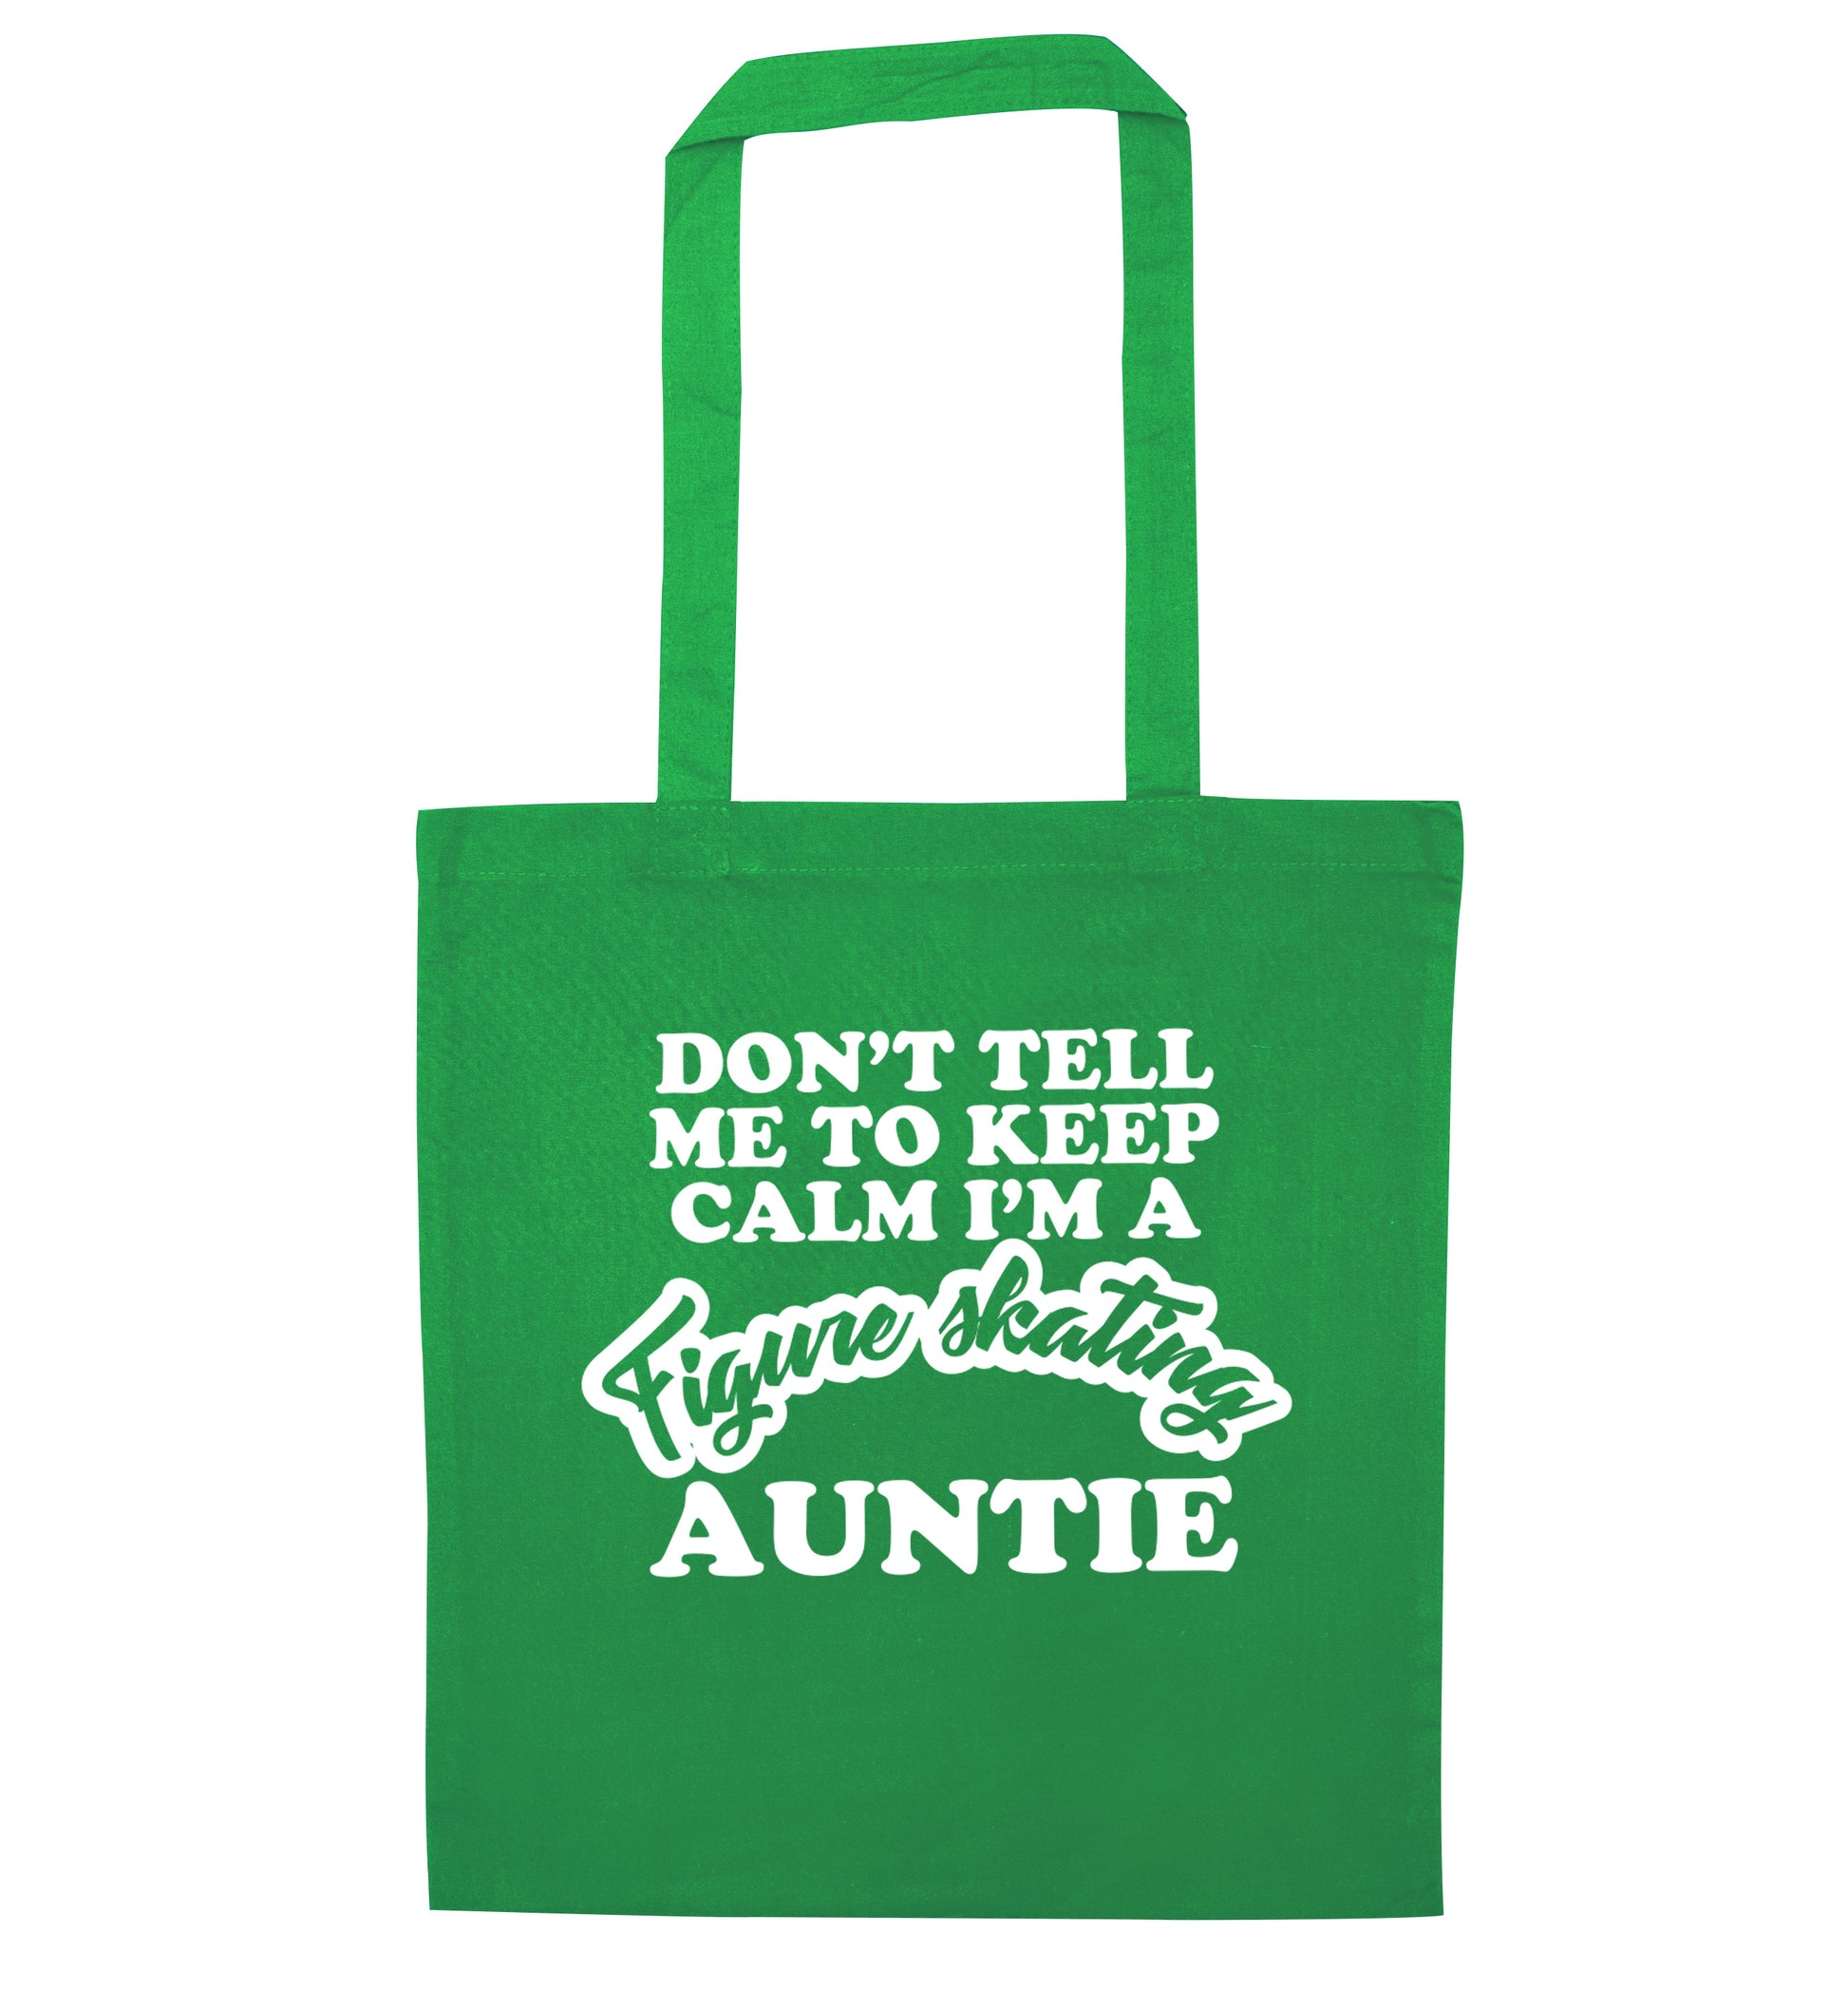 Don't tell me to keep calm I'm a figure skating auntie green tote bag